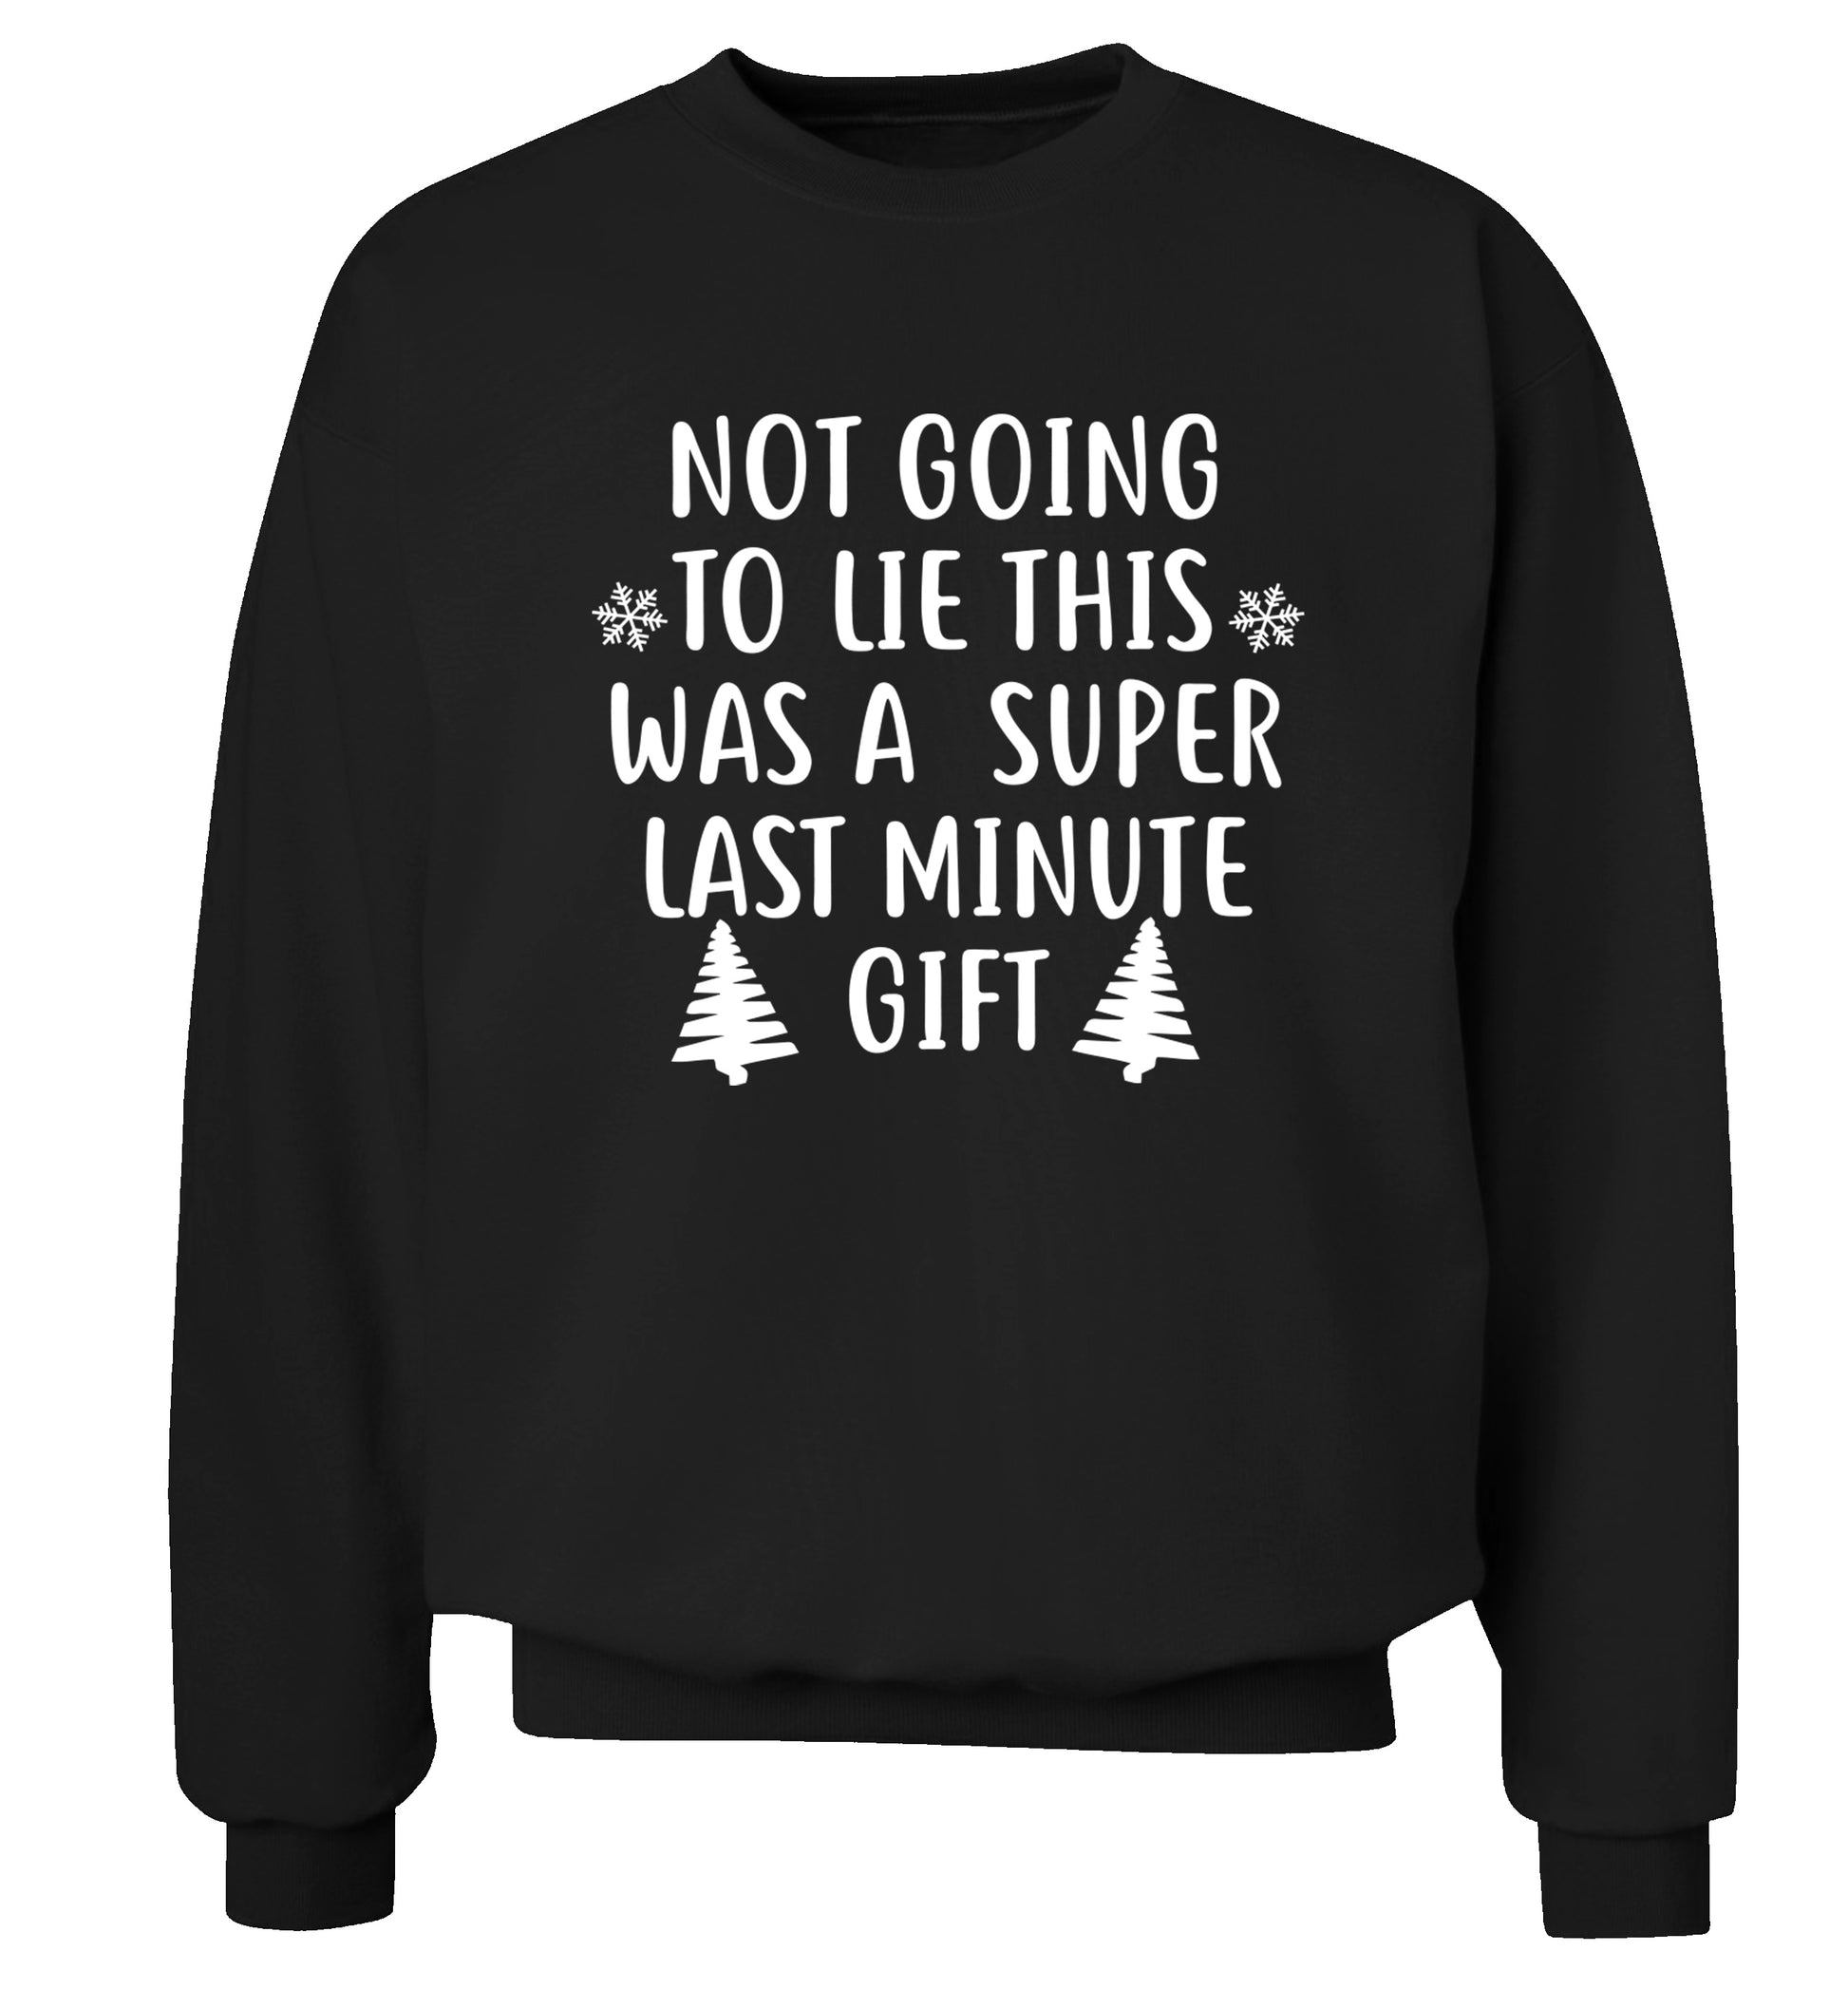 Not going to lie this was a super last minute gift Adult's unisex black Sweater 2XL